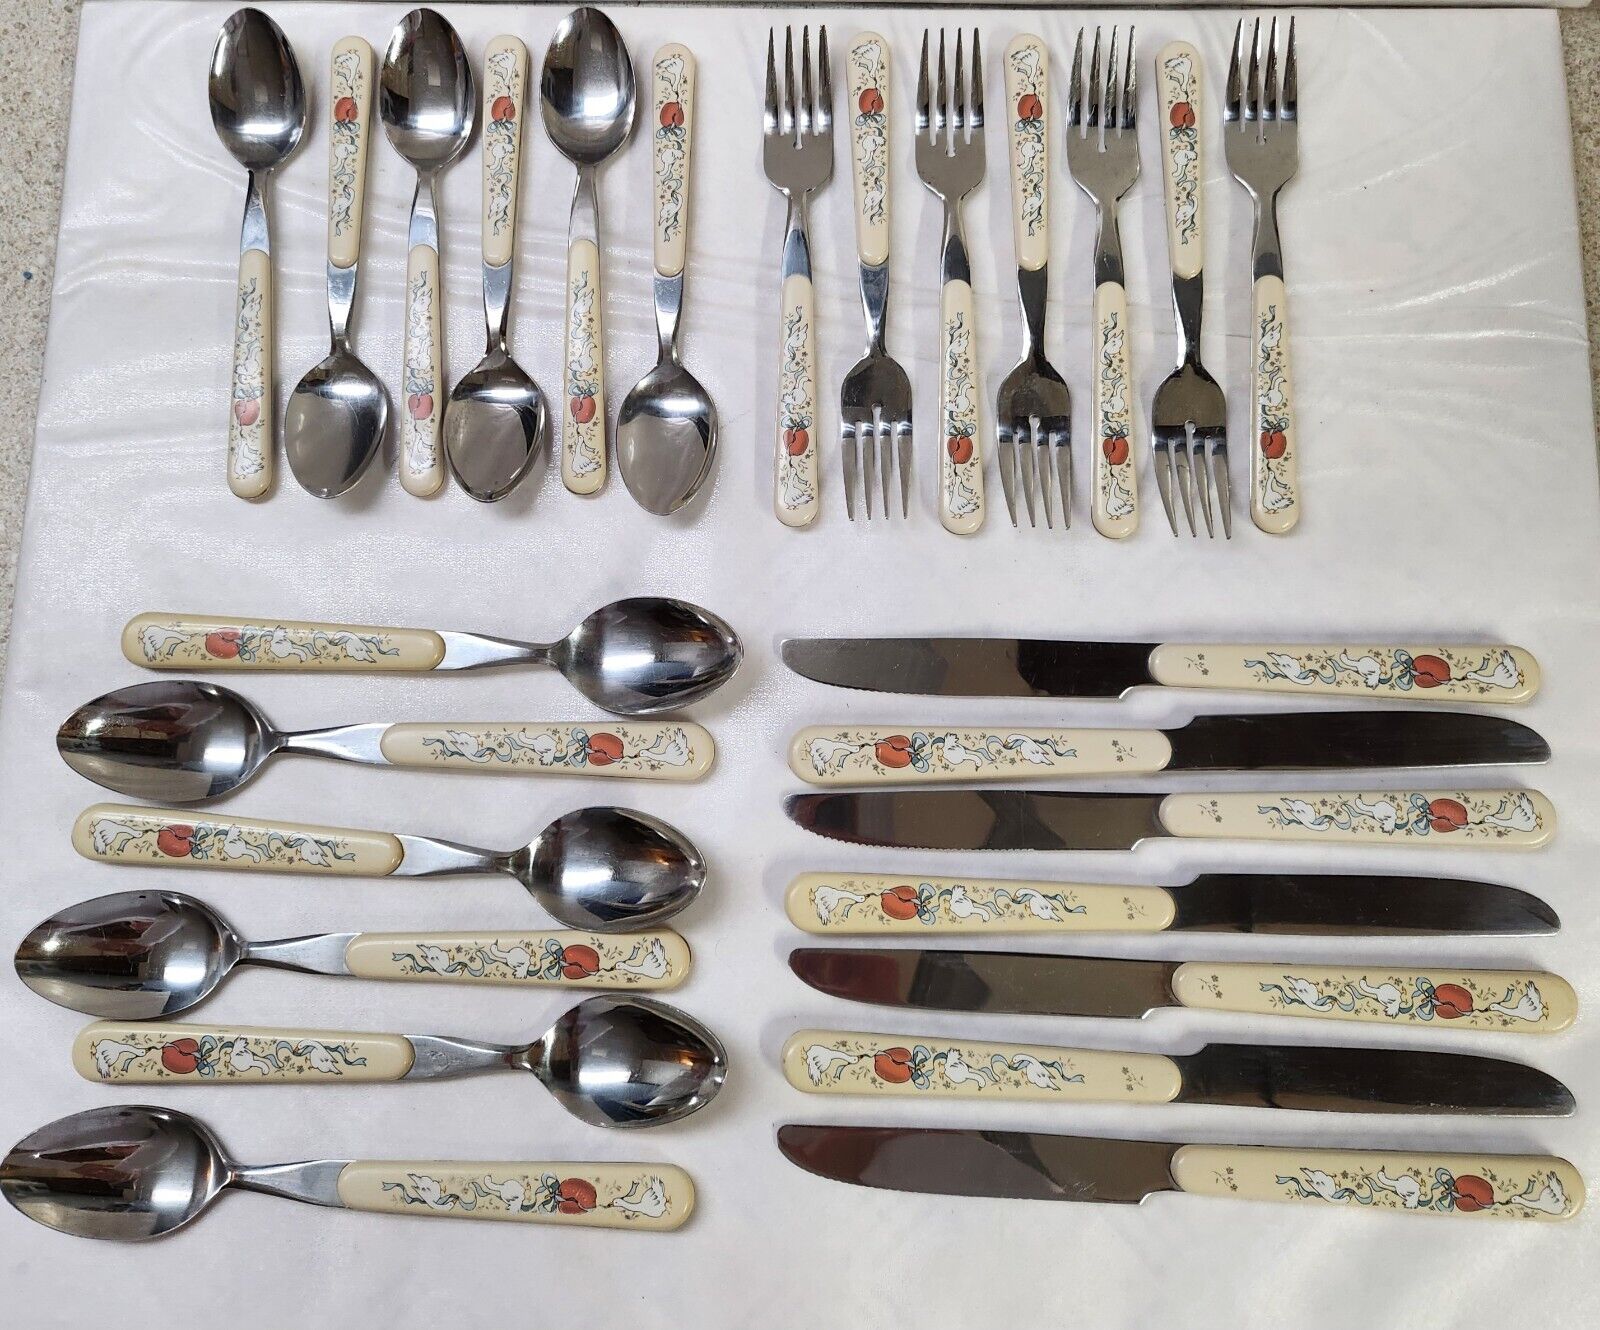 Marmalade Goose Country Flatware Silverware Forks Spoons Knives 26 Pcs Japan 